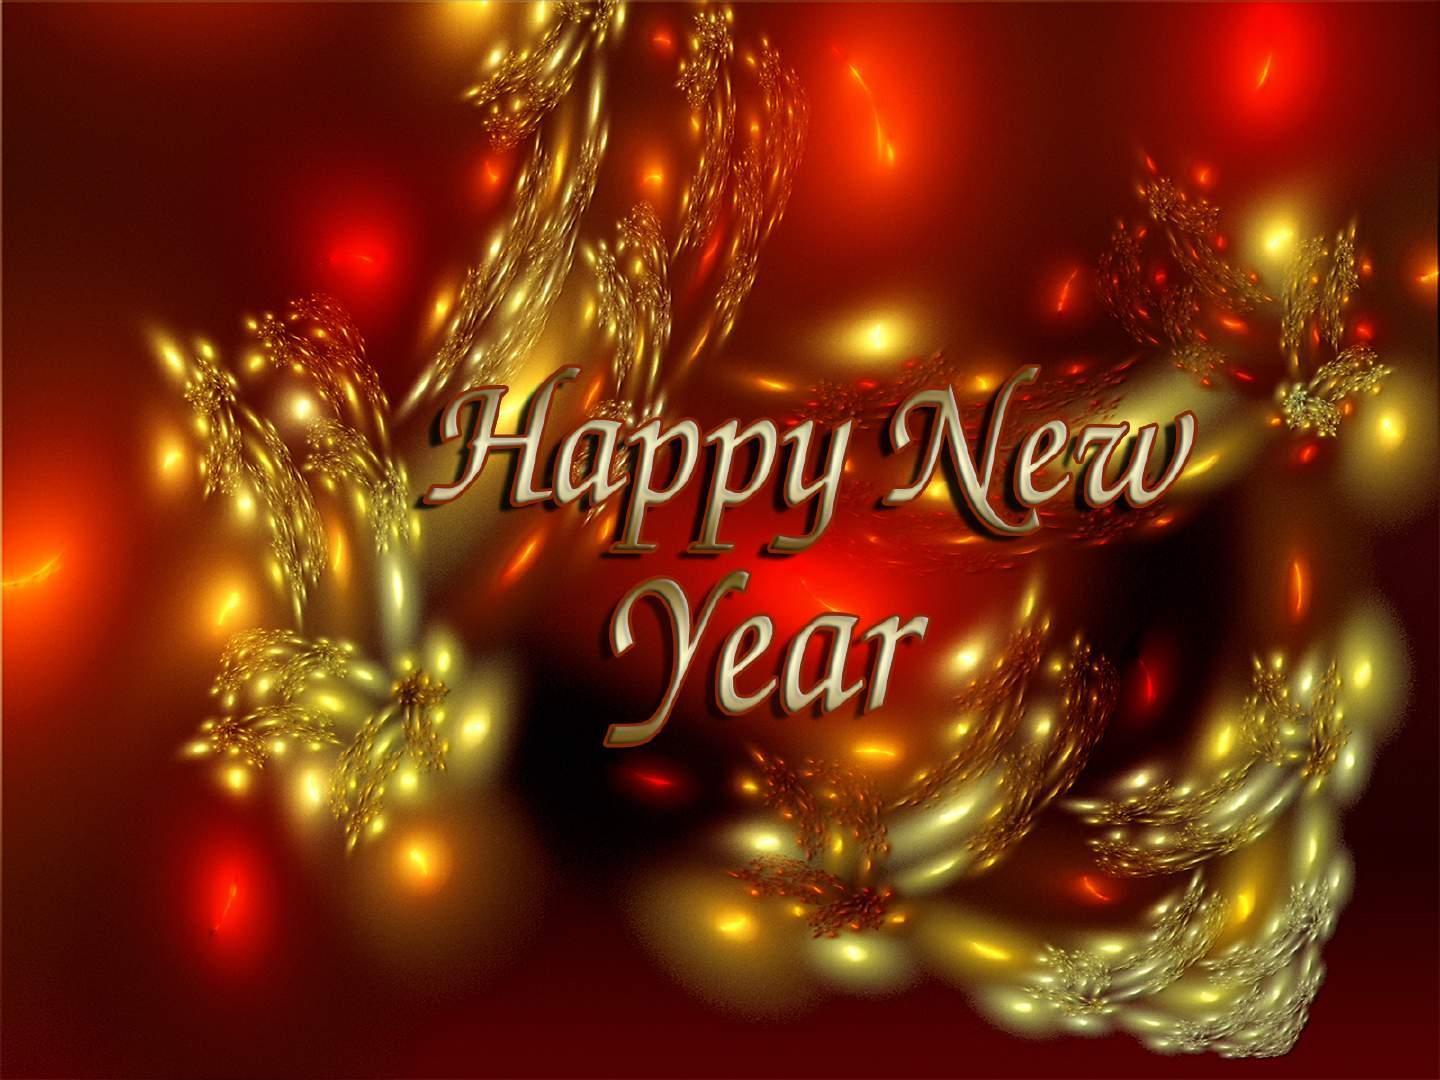 Happy new year latest picture free desktop background